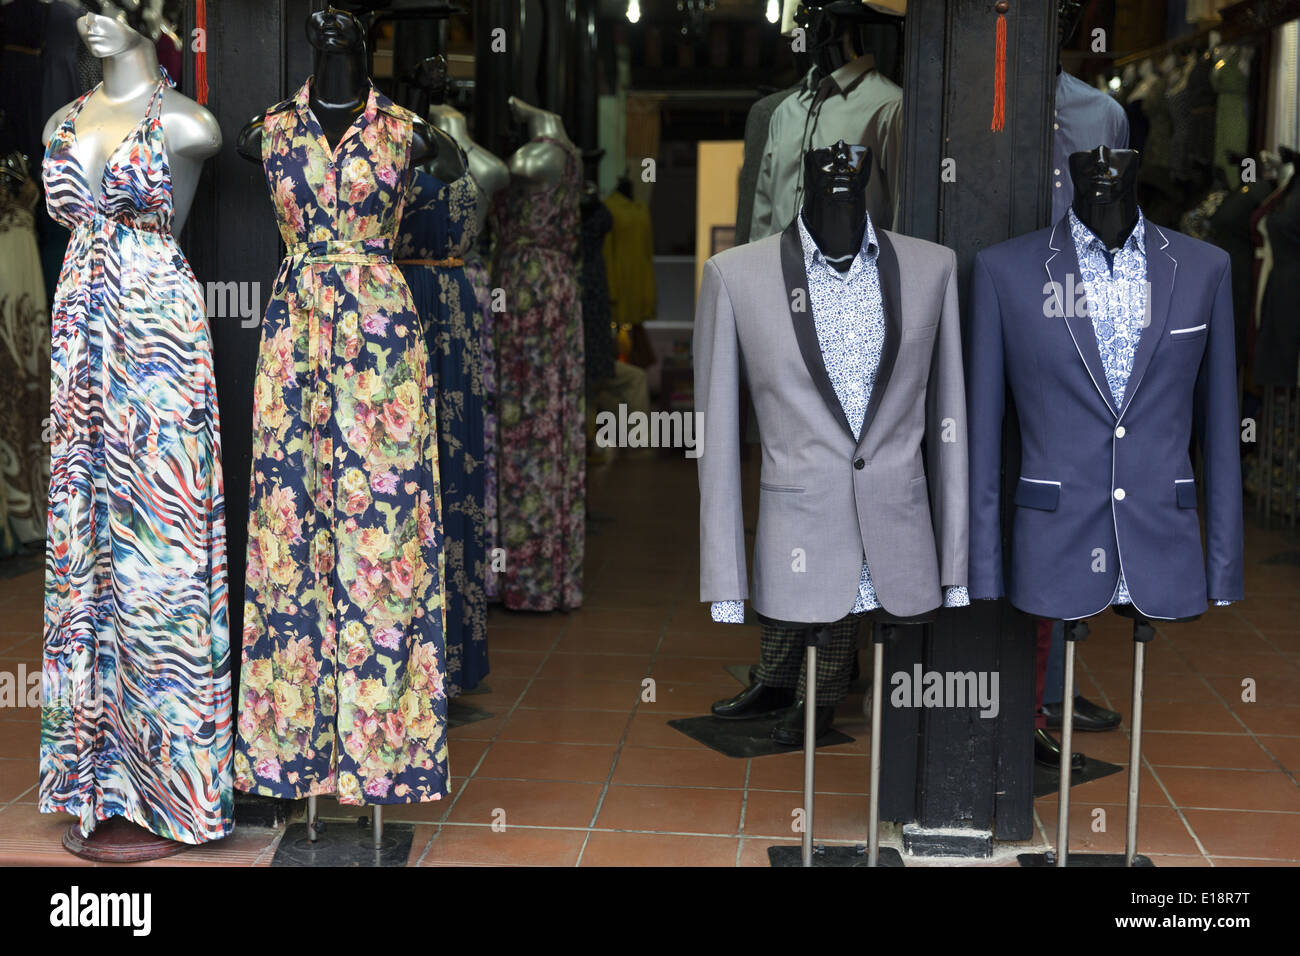 Mannequins with different clothing designs. Hoi An is a famous city for having a large number of tailor shops. Stock Photo